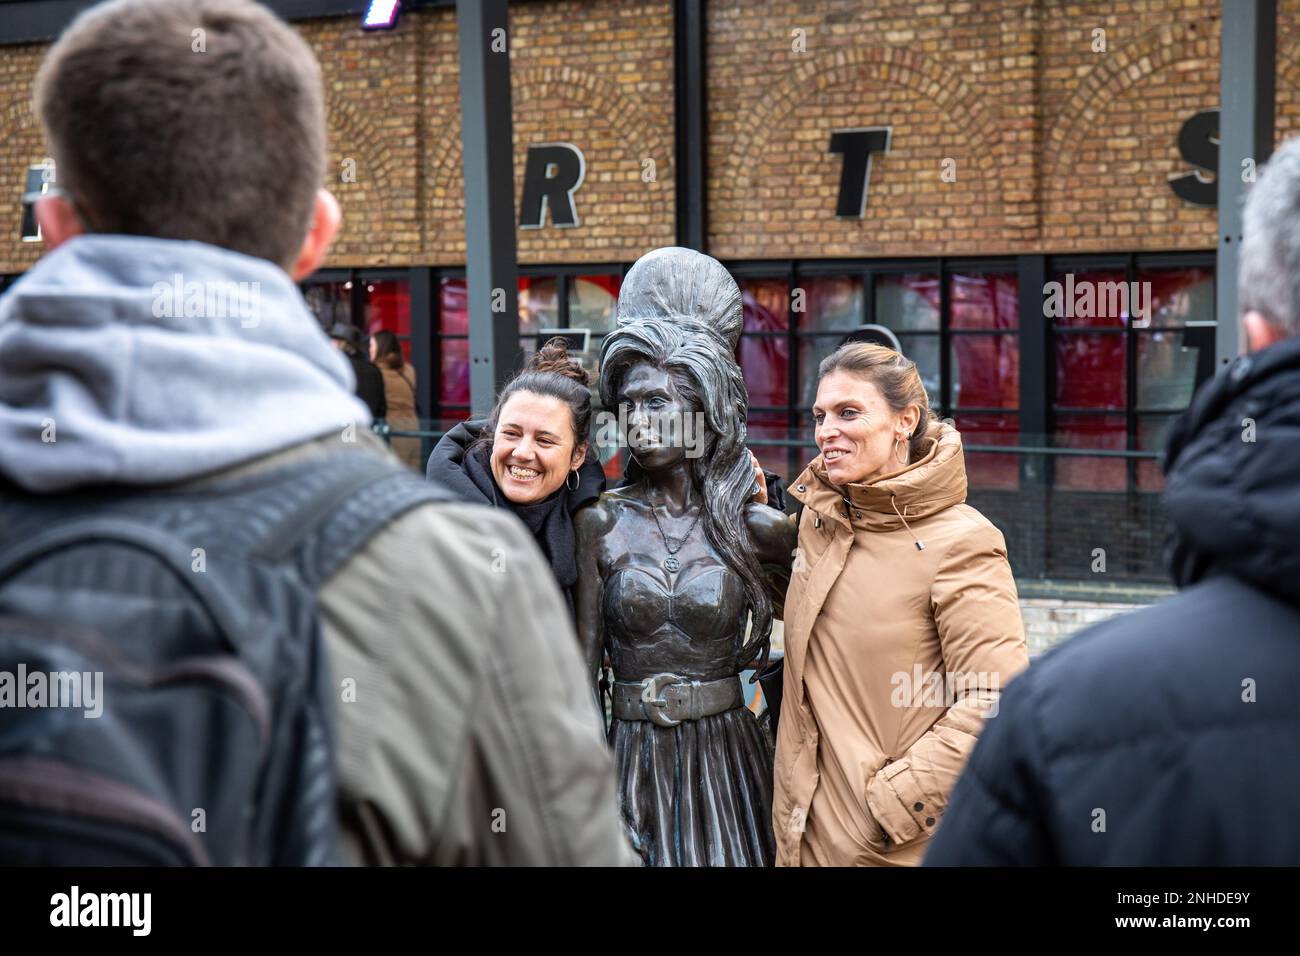 People posing with Amy Winehouse statue, designed by Scott Eaton (2014), at Stables Market in Camden Town district of London, England Stock Photo